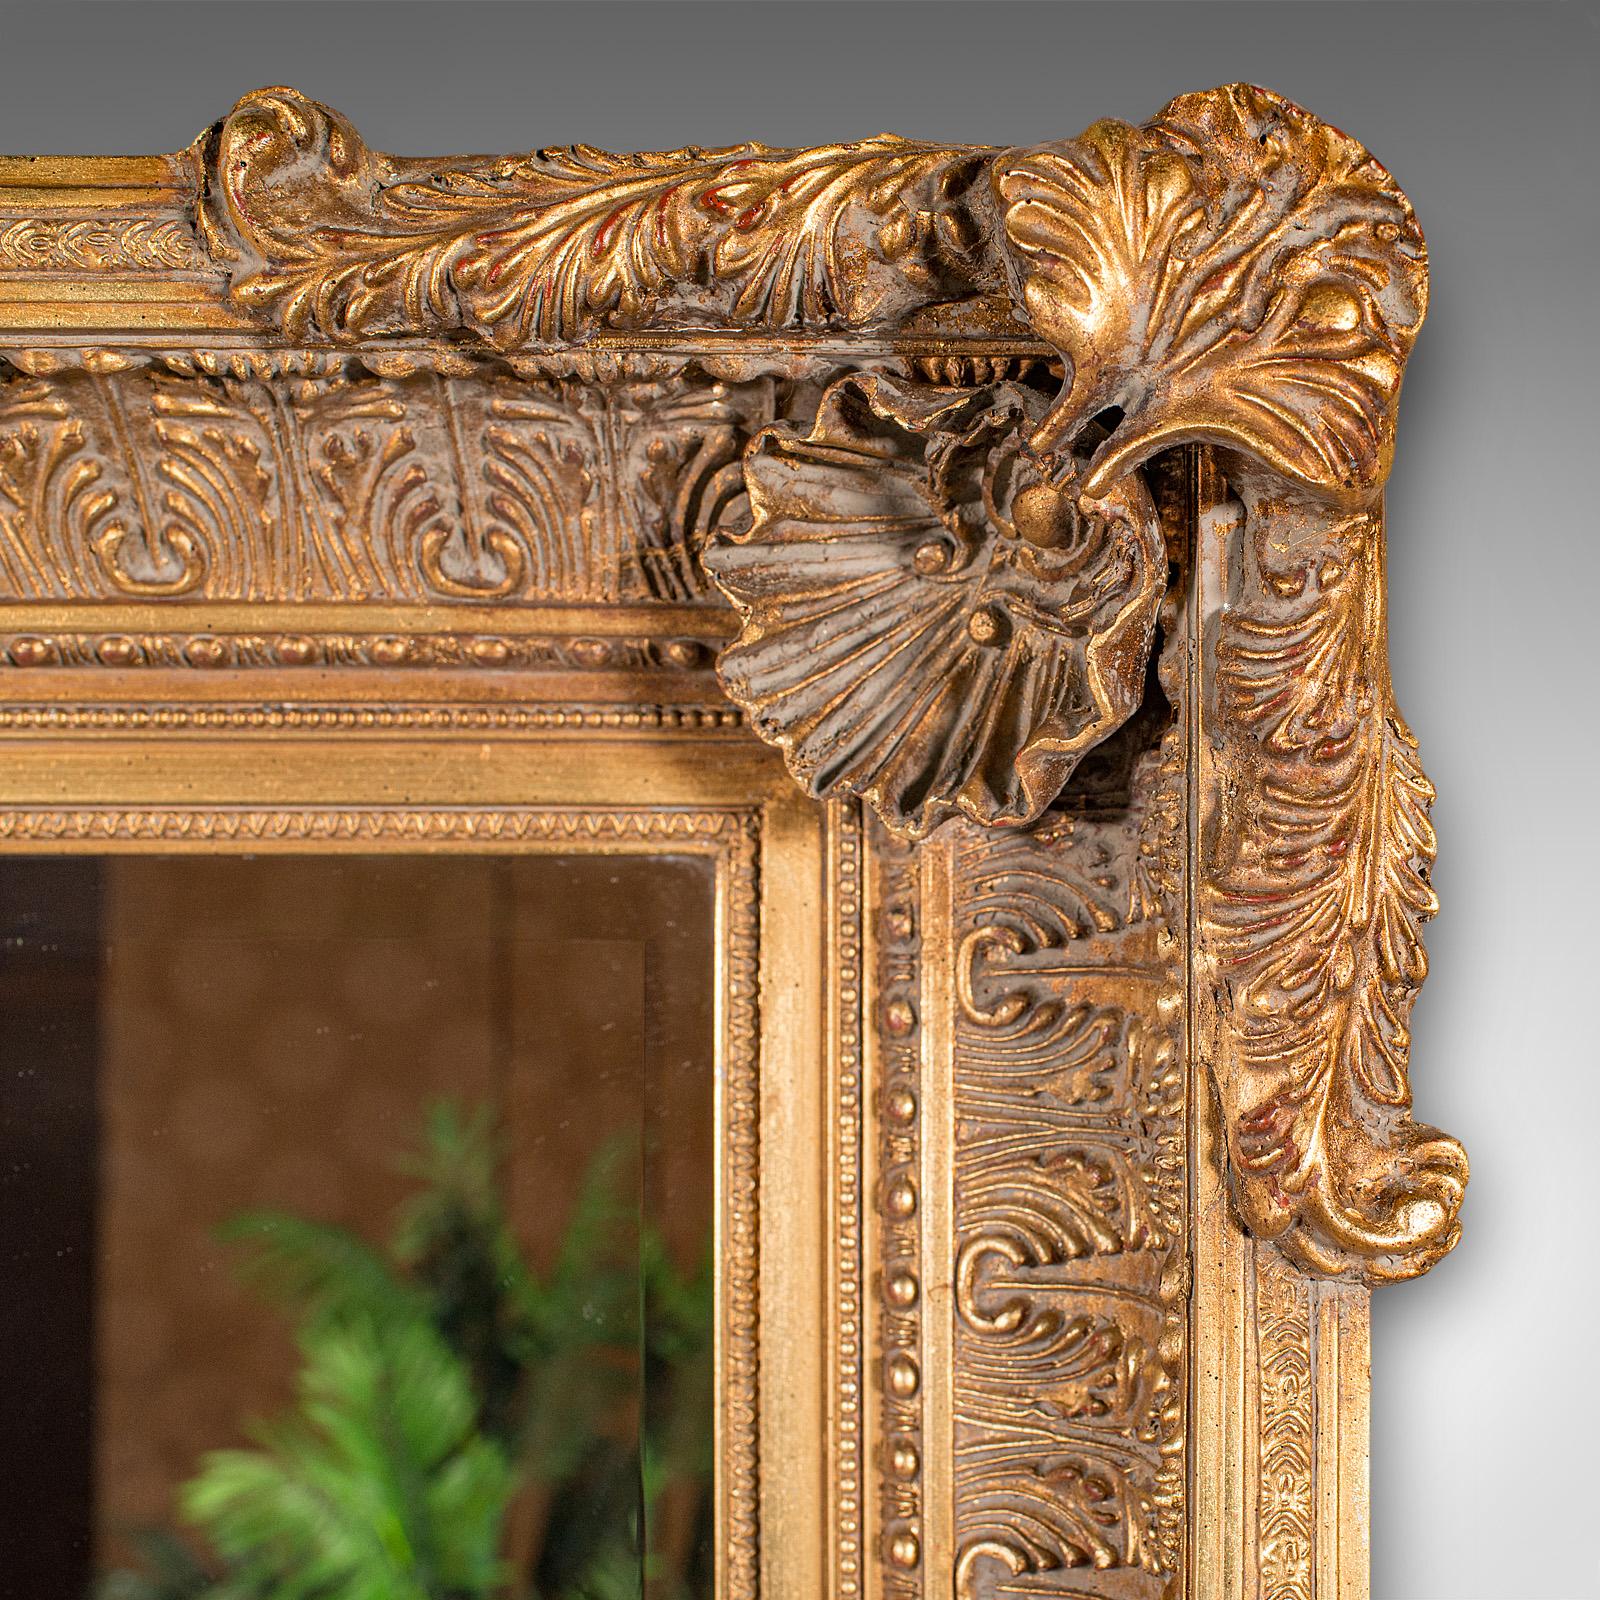 20th Century Large Vintage Renaissance Revival Wall Mirror, Continental, Giltwood, Decorative For Sale